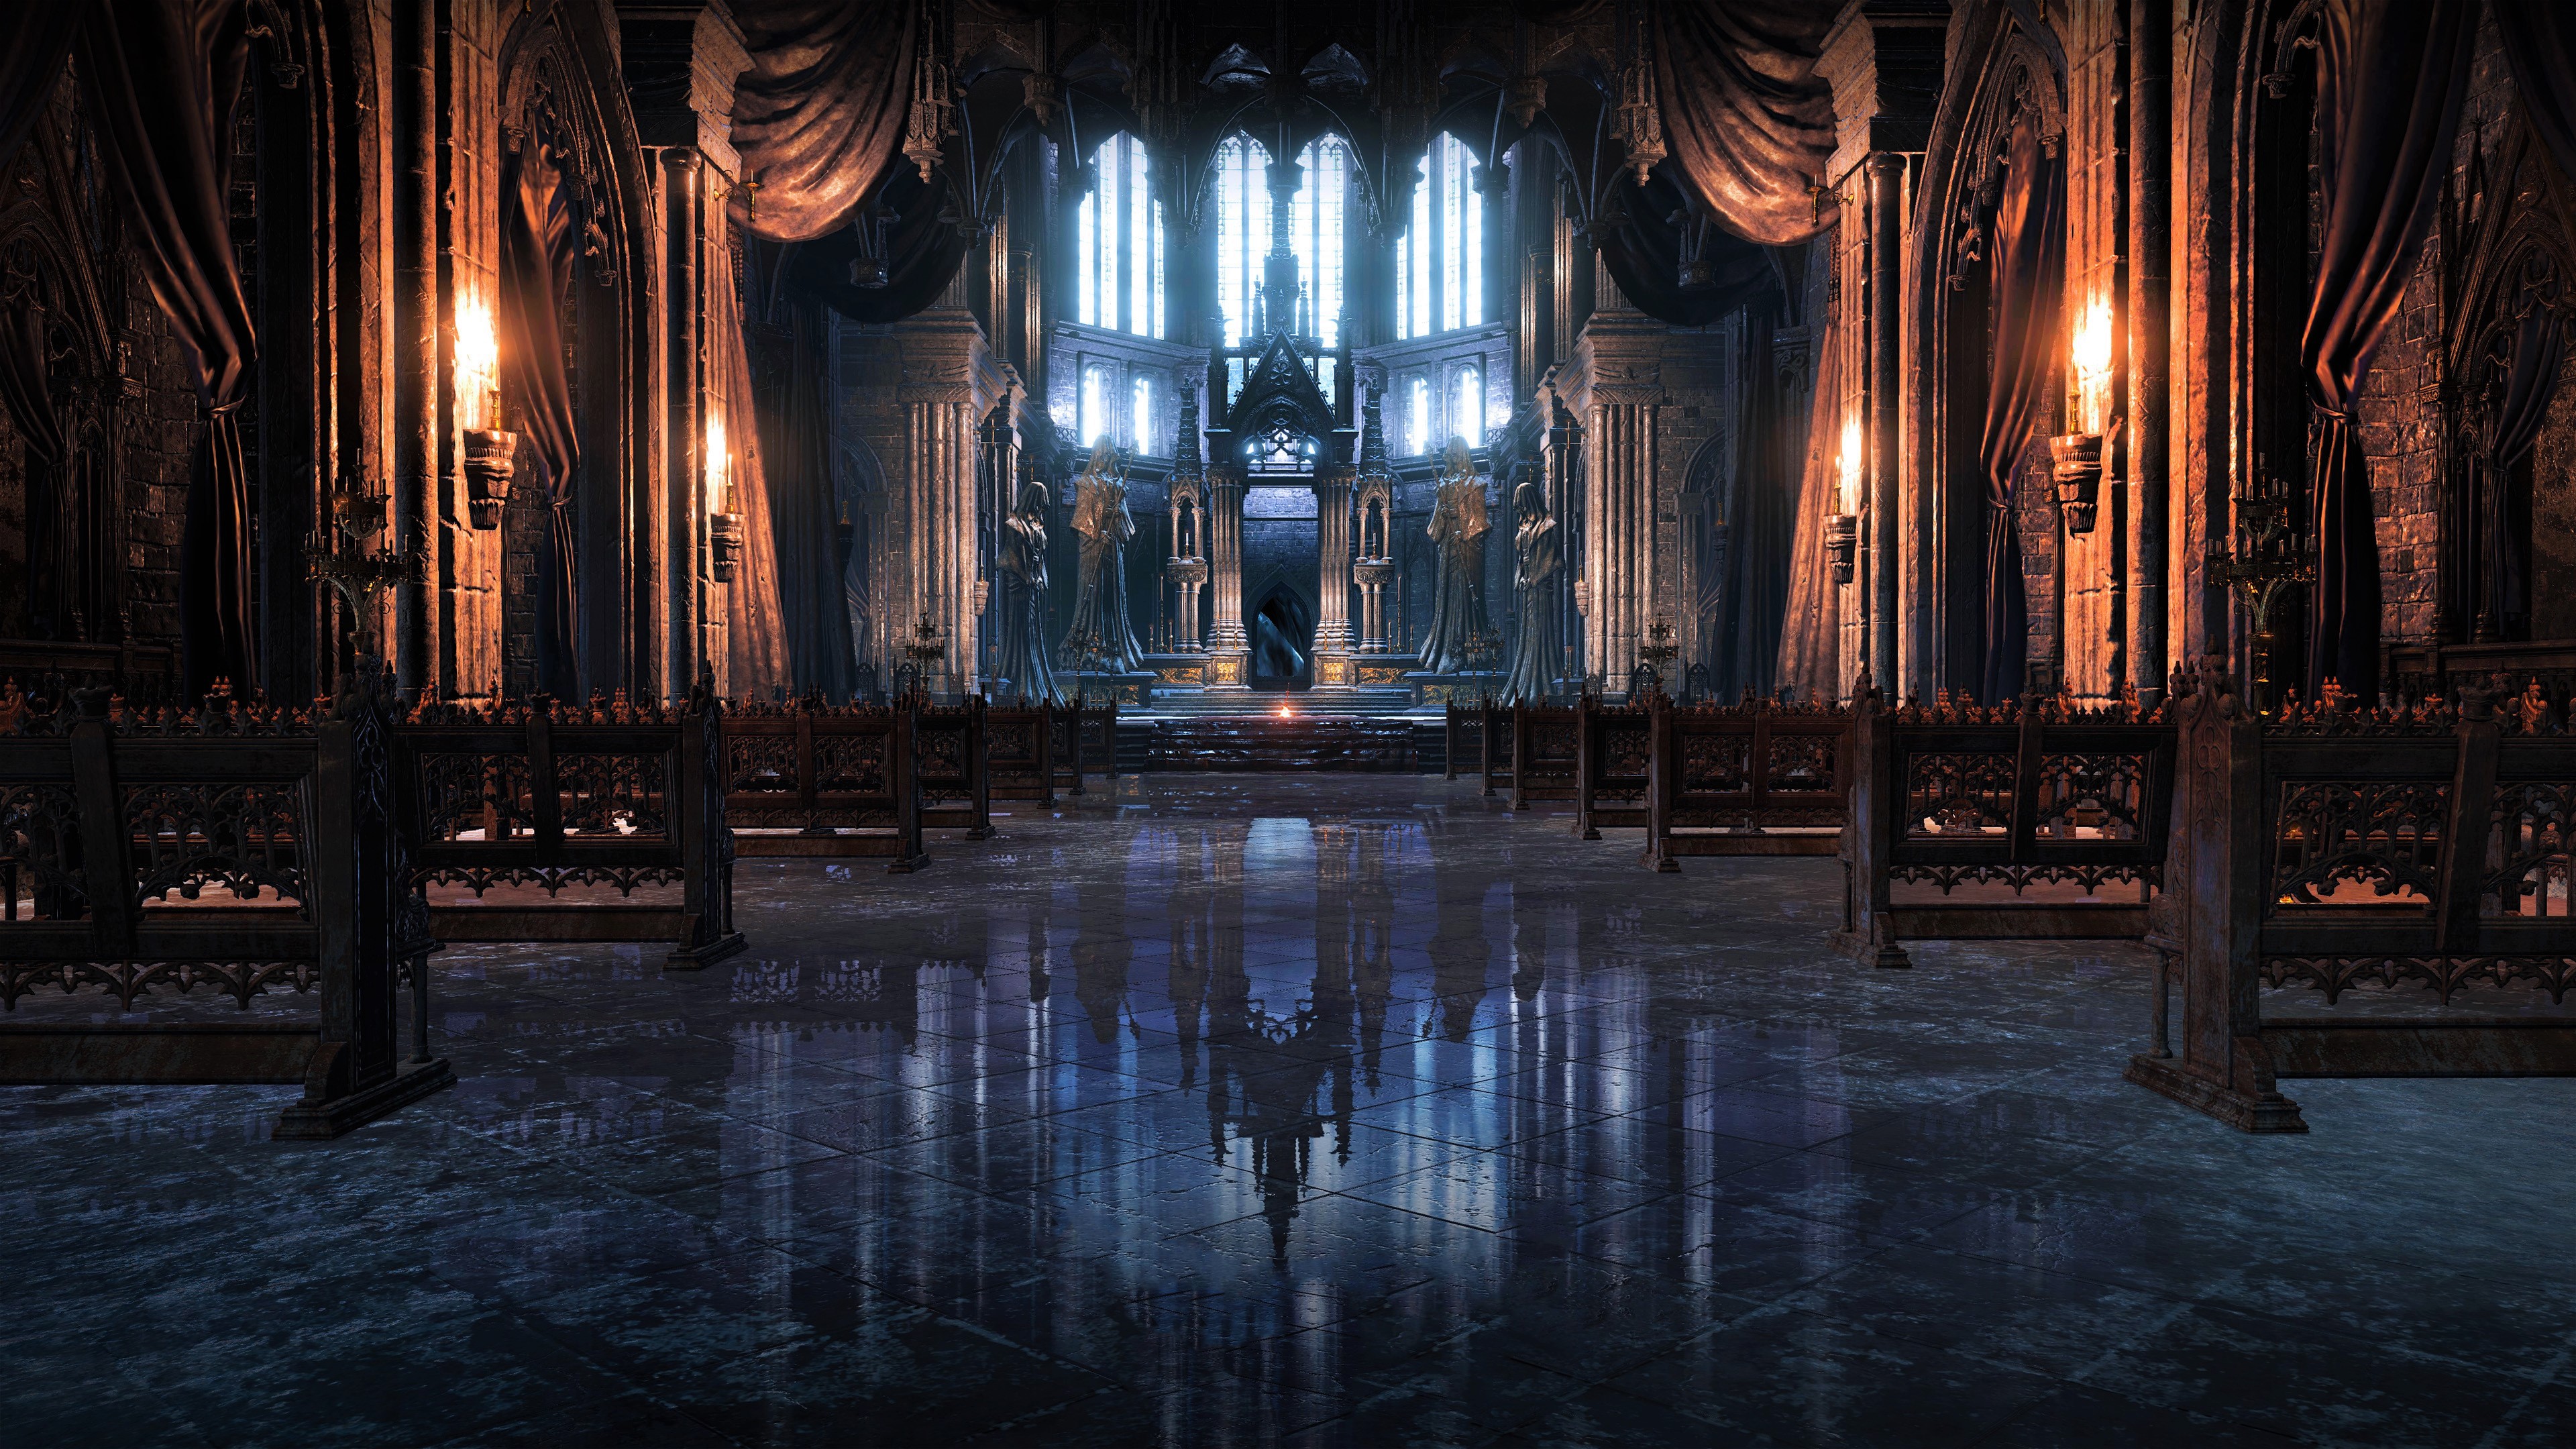 Inside a Gothic Cathedral